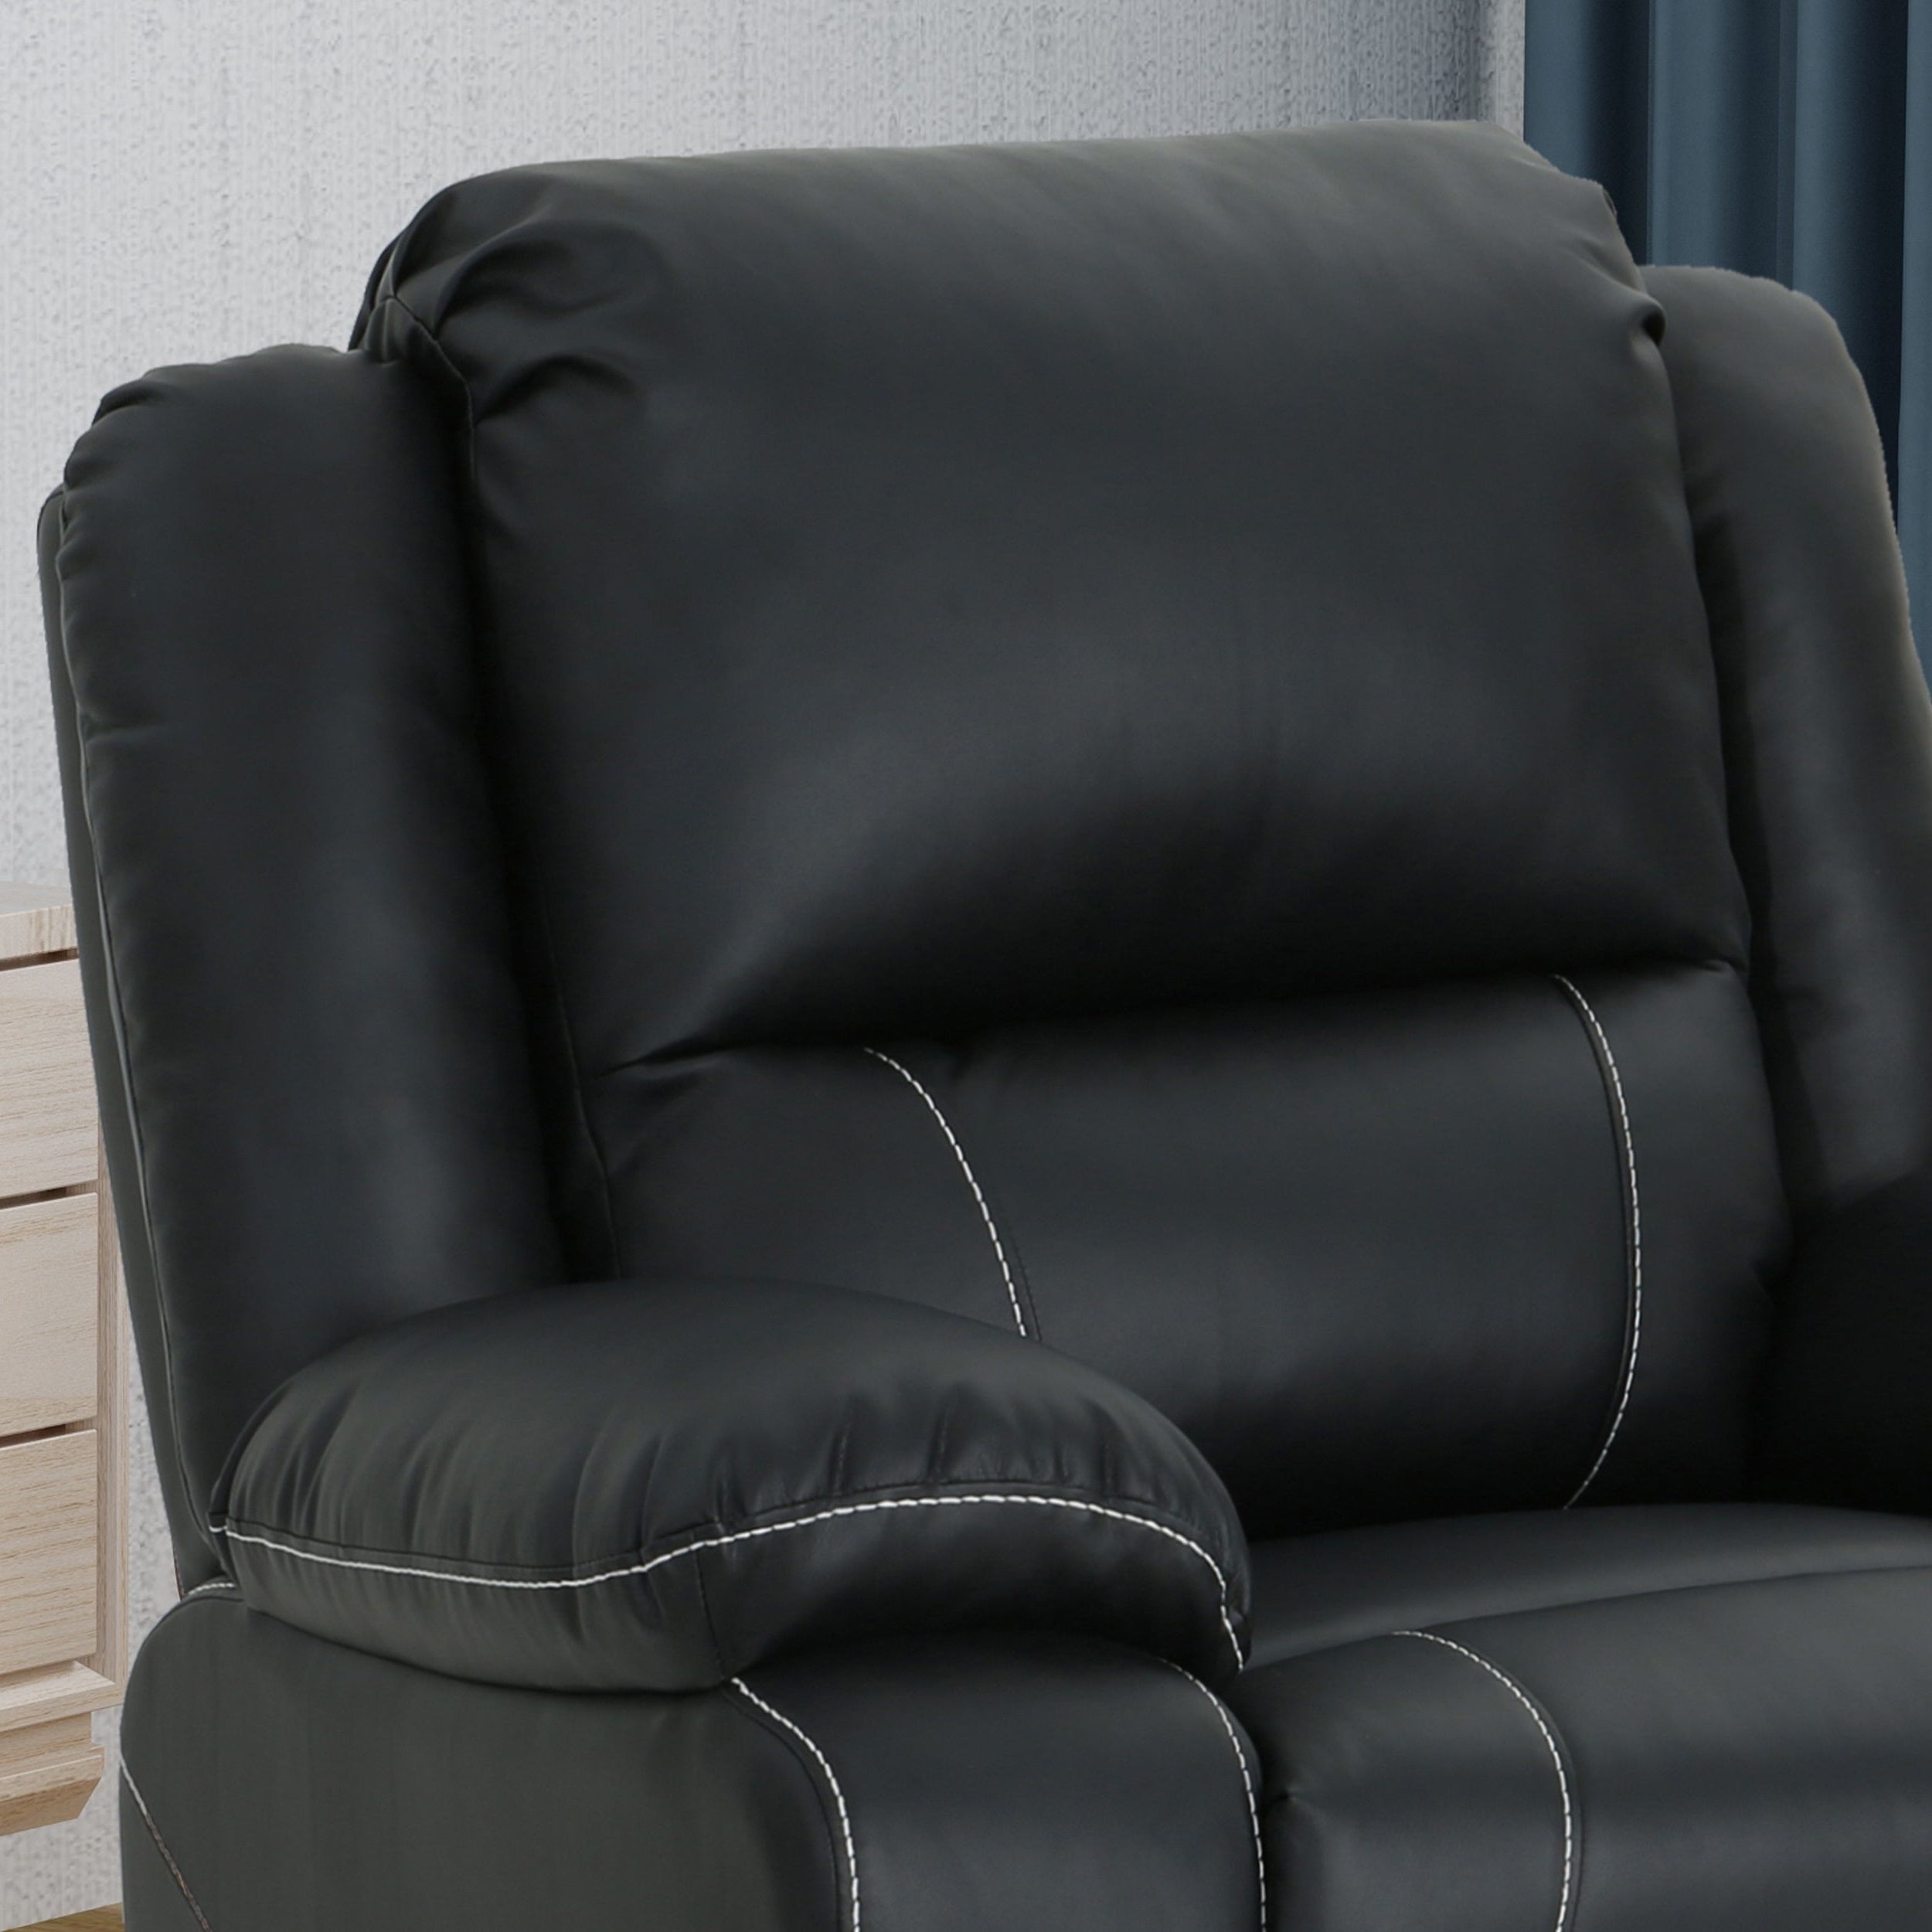 Fashionable Black Faux Leather Swivel Recliners Regarding Malic Classic Tufted Pu Faux Leather Swivel Reclinerchristopher (View 10 of 10)